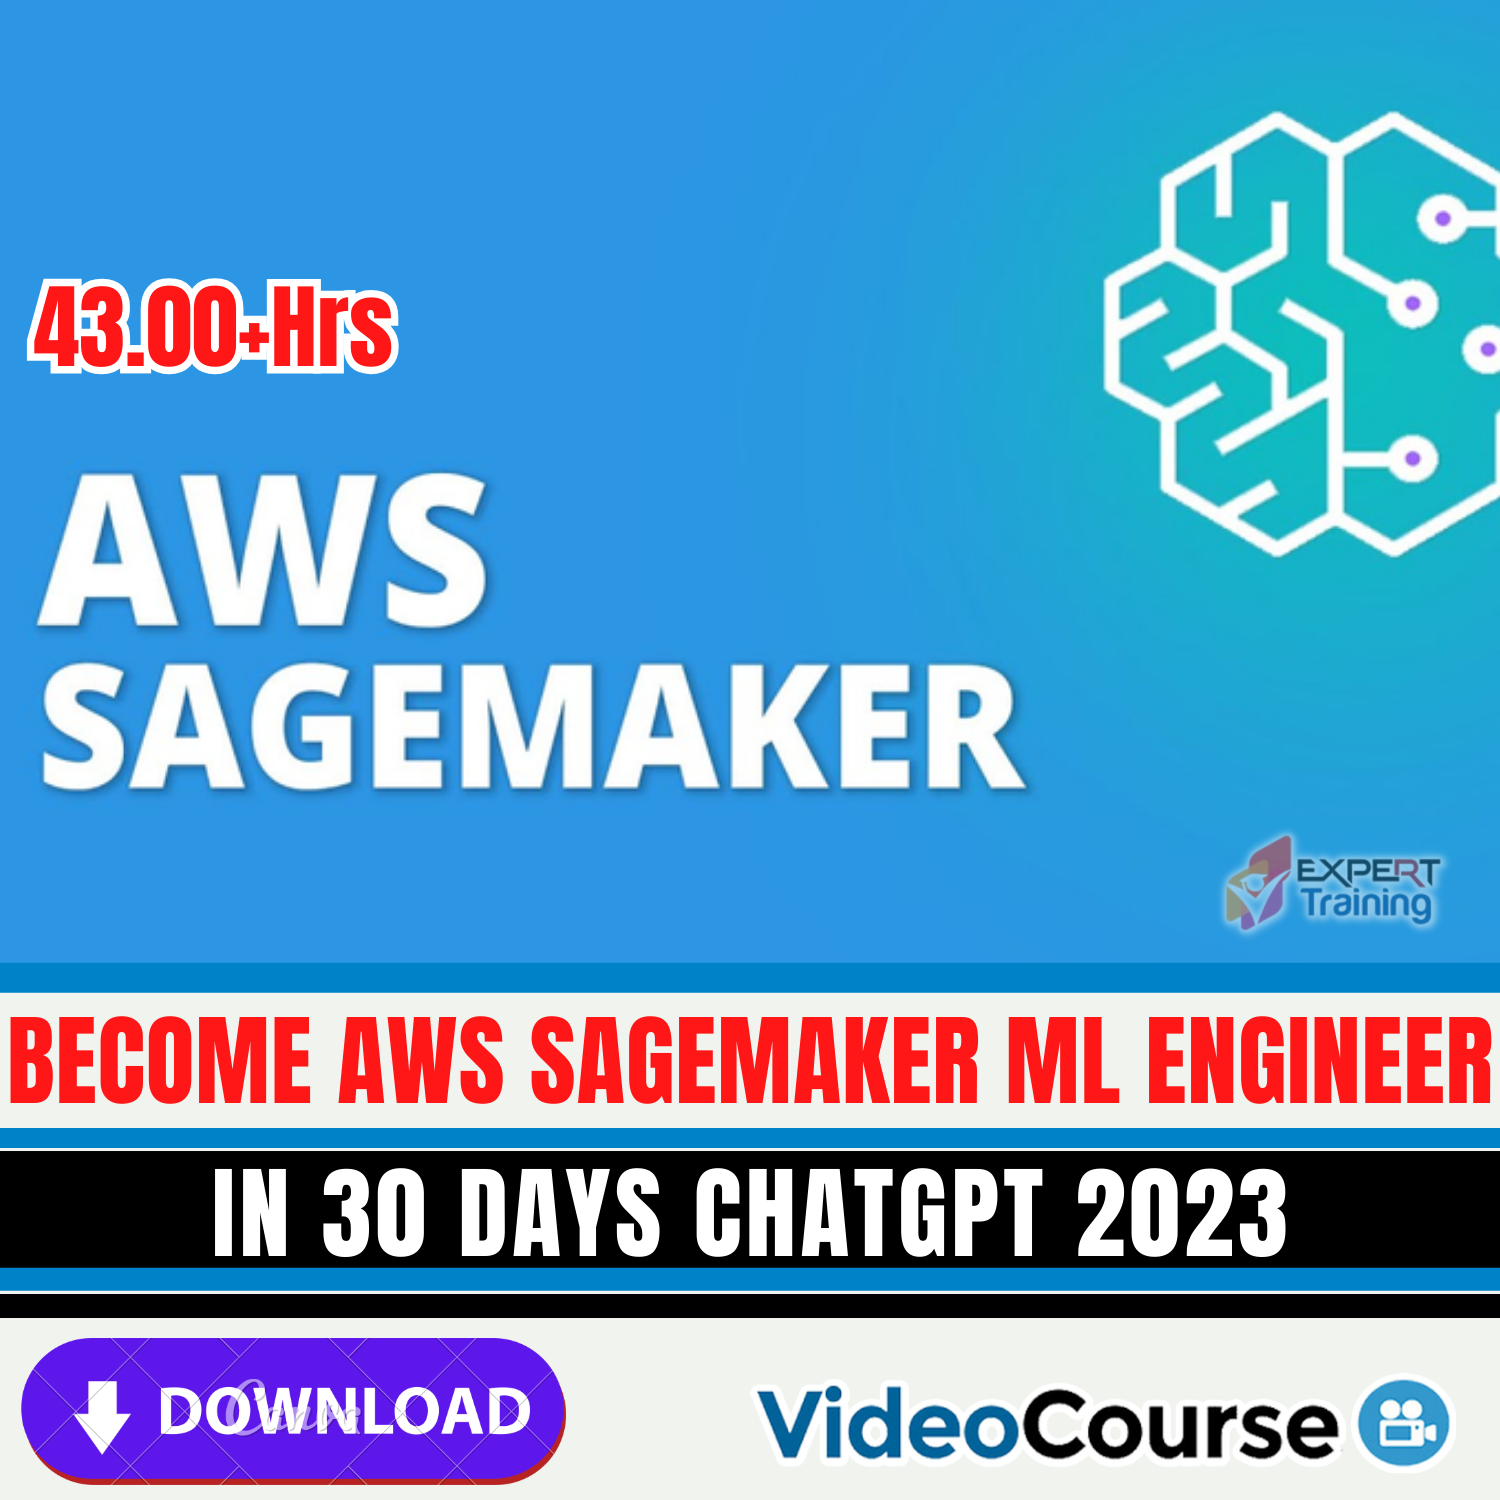 Become AWS SageMaker ML Engineer in 30 Days ChatGPT 2023